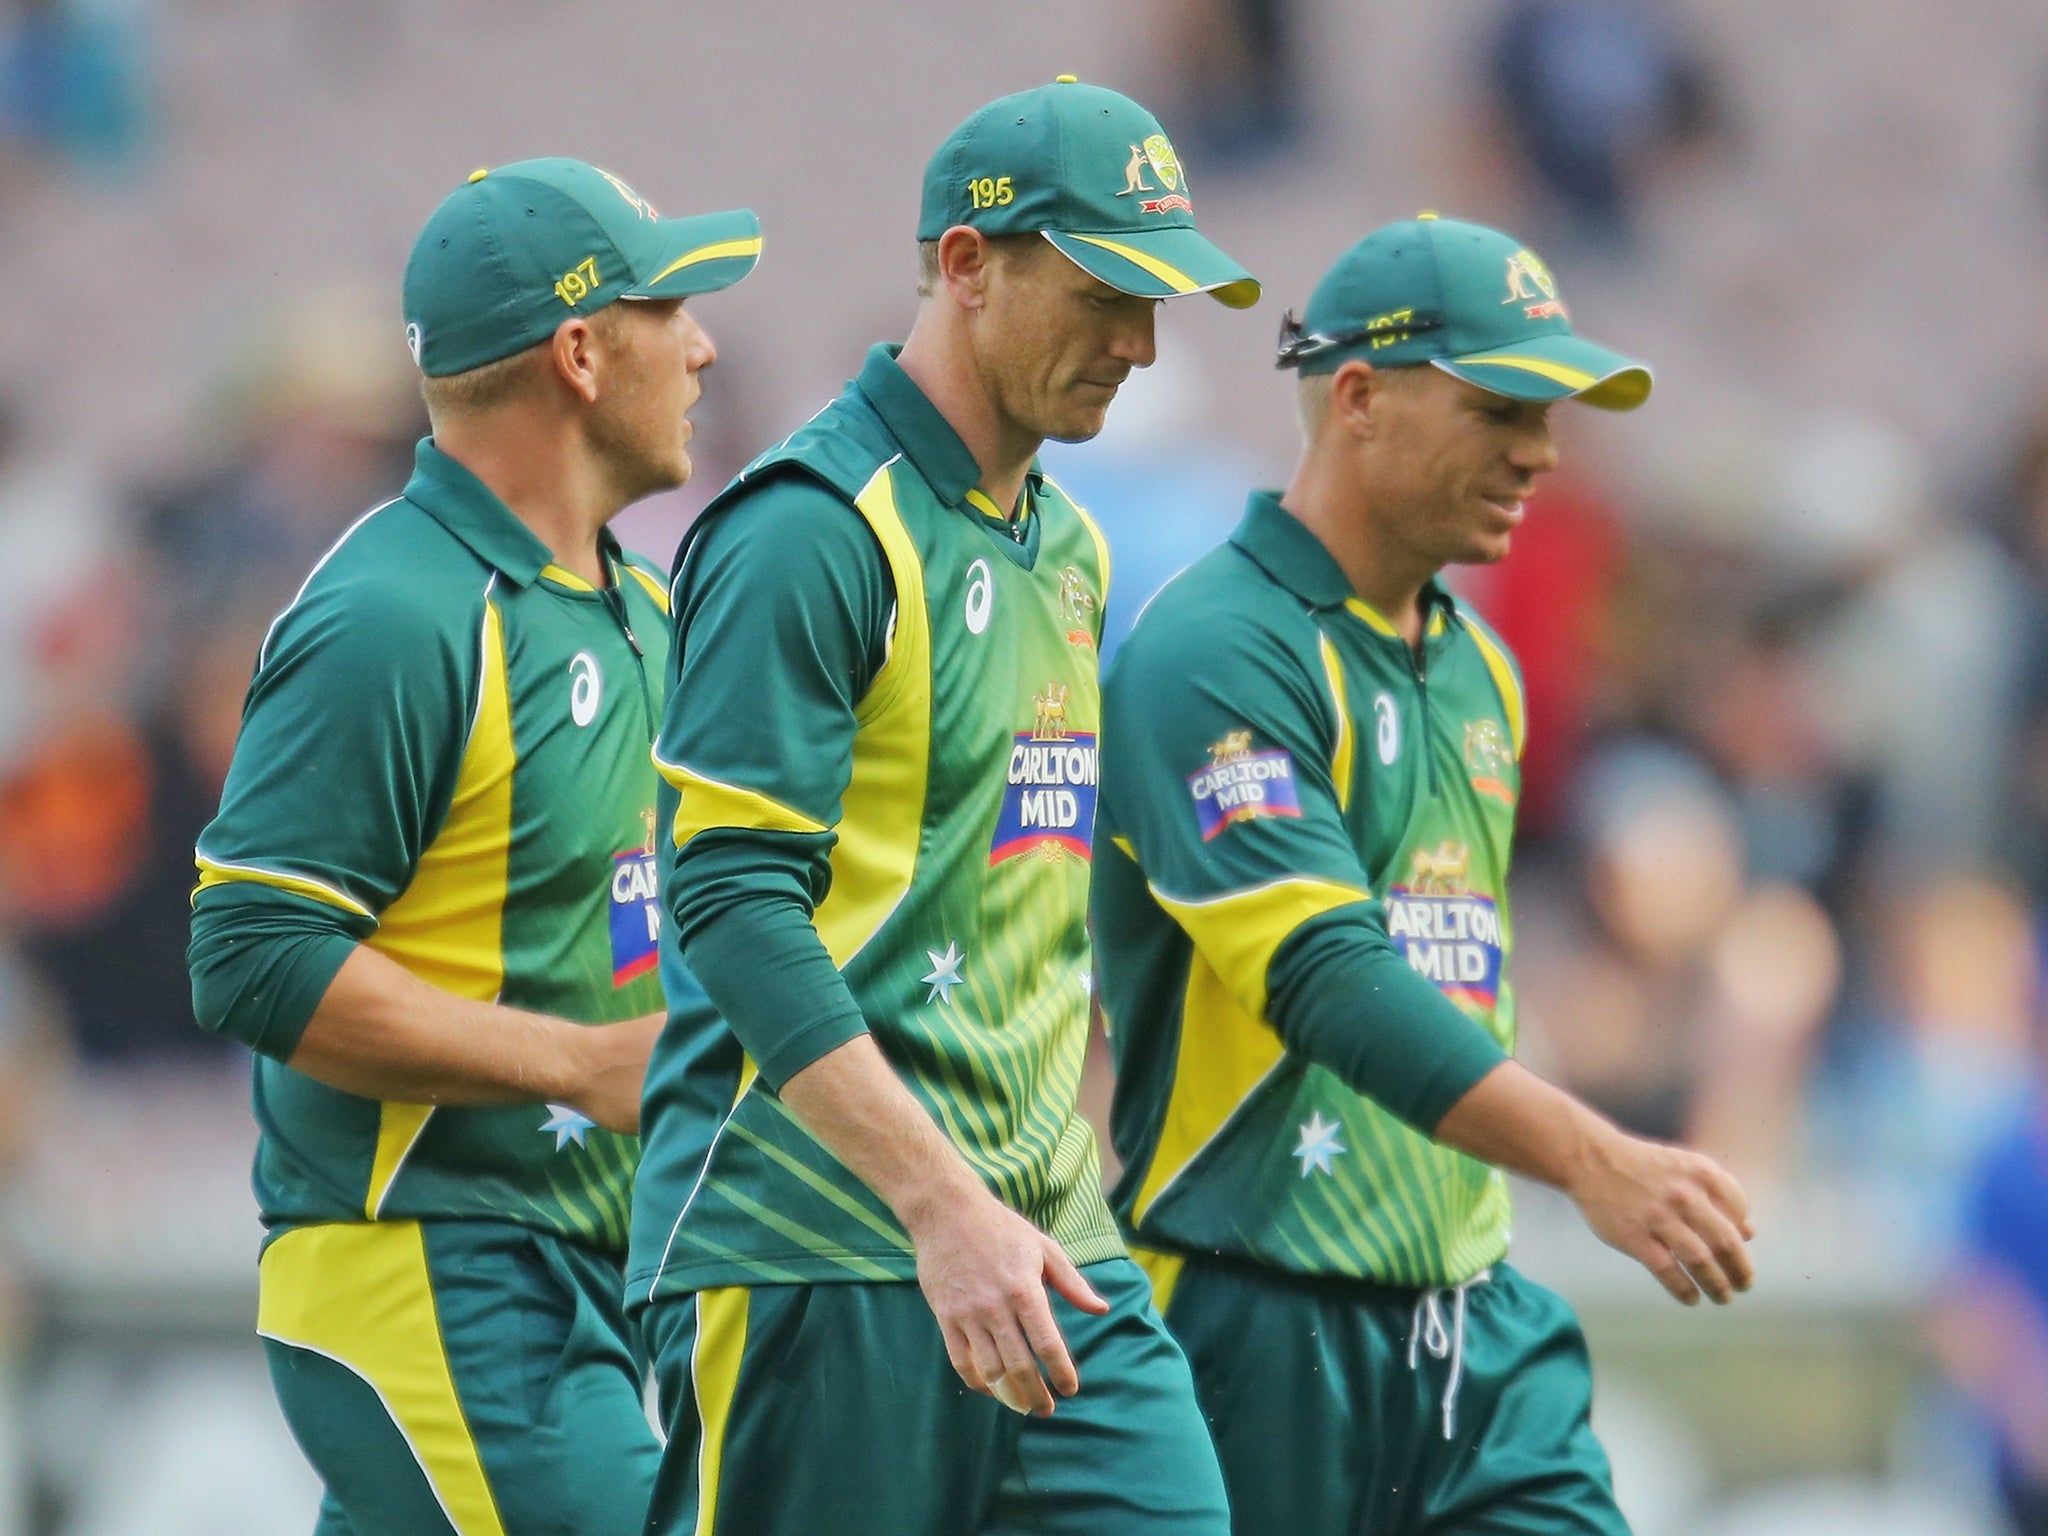 Aaron Finch, captain George Bailey and David Warner of Australia leave the field at the end of the Indian innings during the One Day International match 